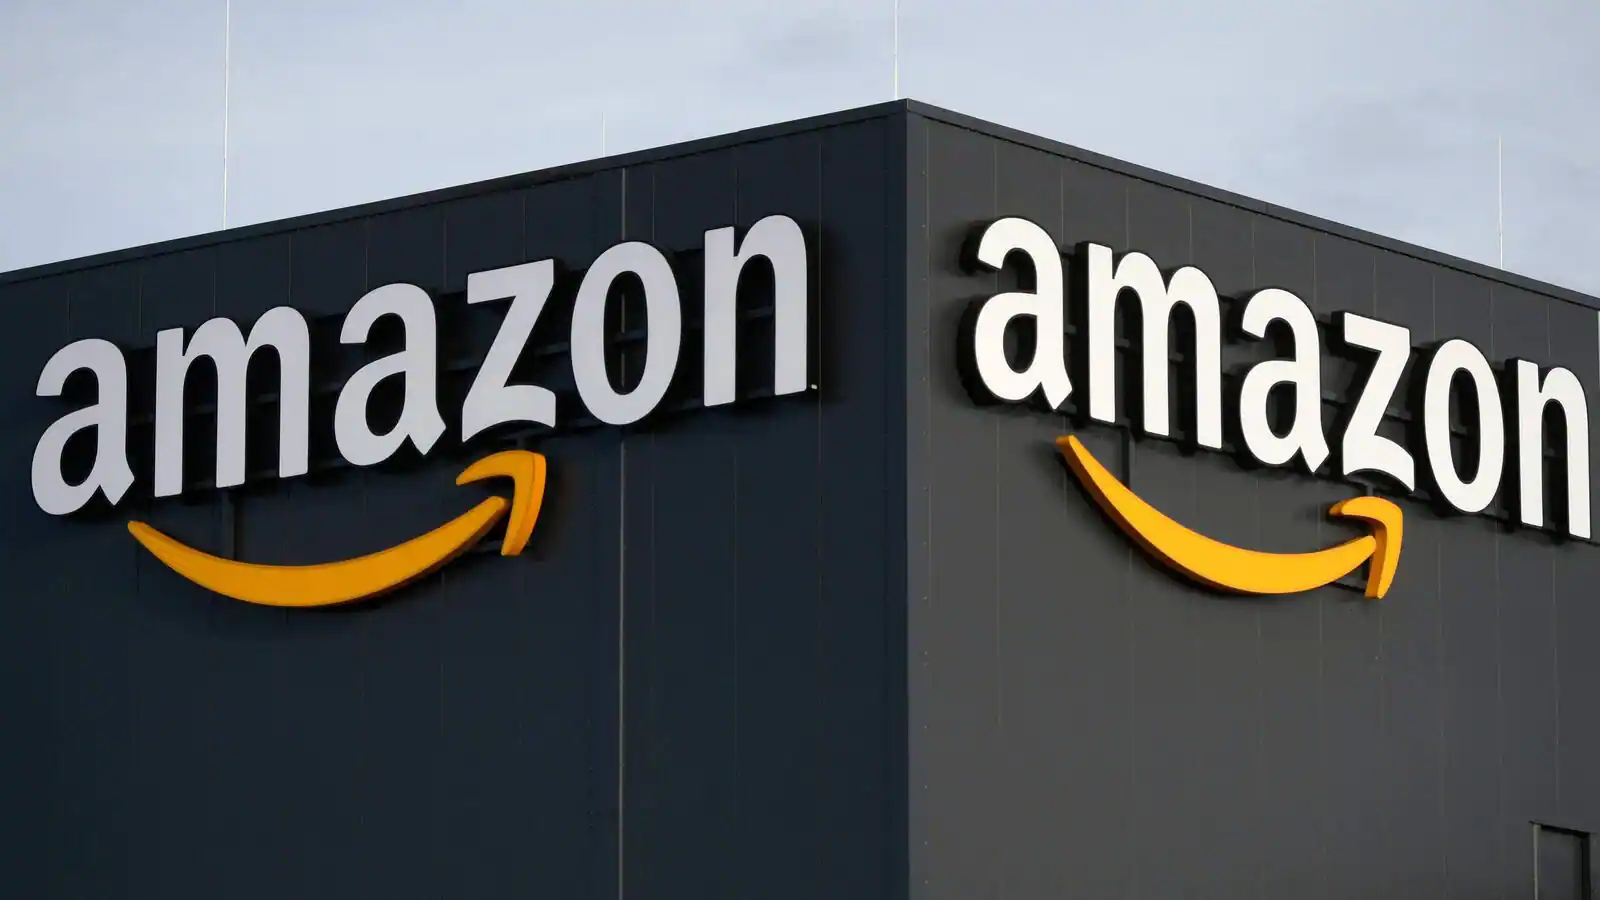 Amazon becomes largest purchaser of renewable energy, fourth year in a row